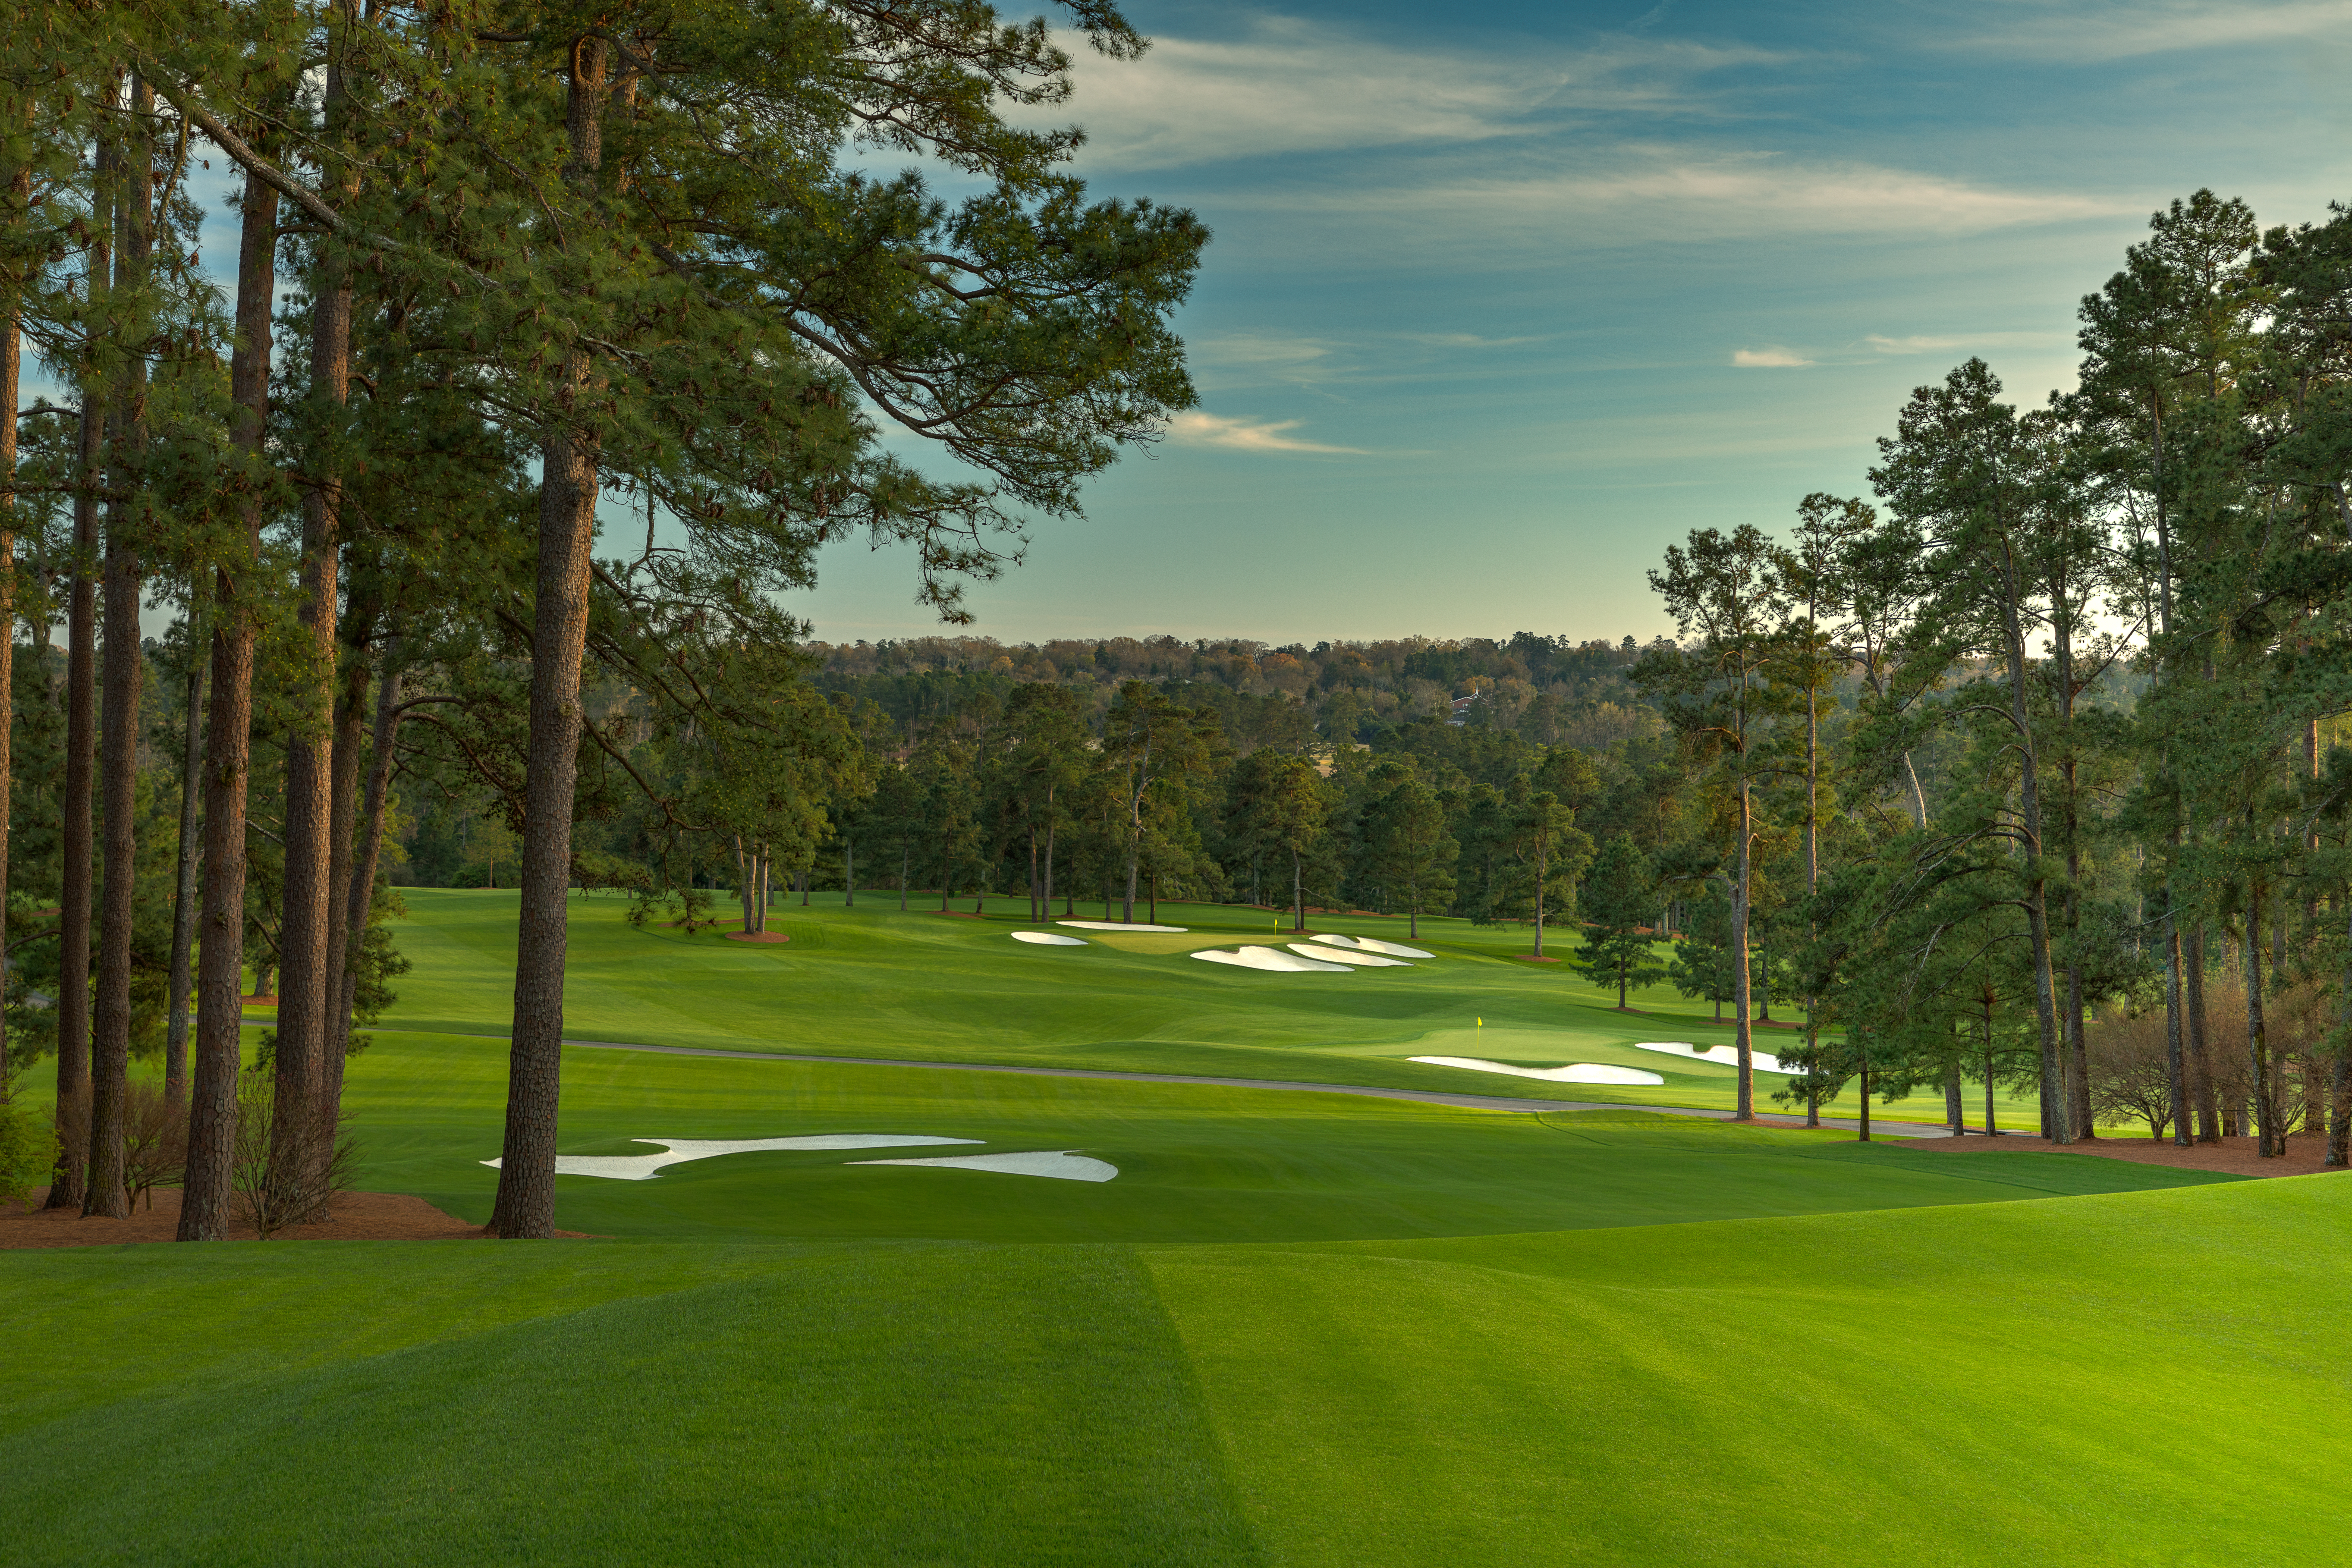 A view from the eighth hole, with No. 2 green (right) and No. 7 green in the foreground. (Augusta National Golf Club/Getty Images).